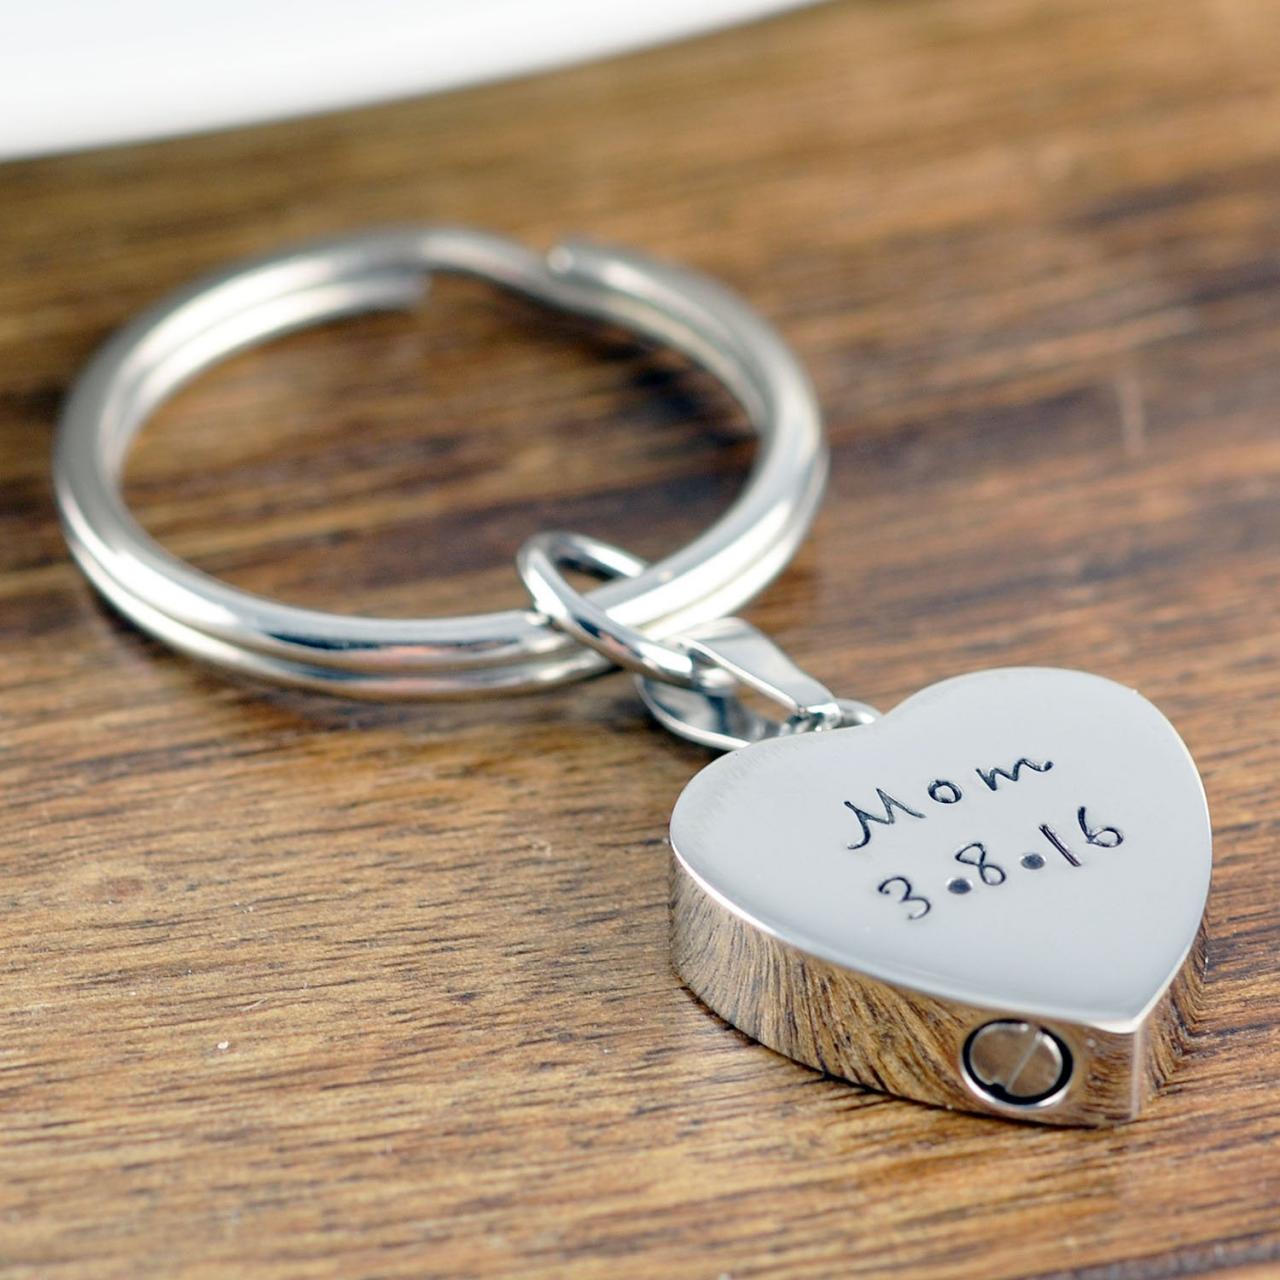 Personalized Memorial Keychain, Cremation Jewelry, Cremation Keychain, Urn Keychain For Ashes, , Cremation Keyring, Cremation Keepsake